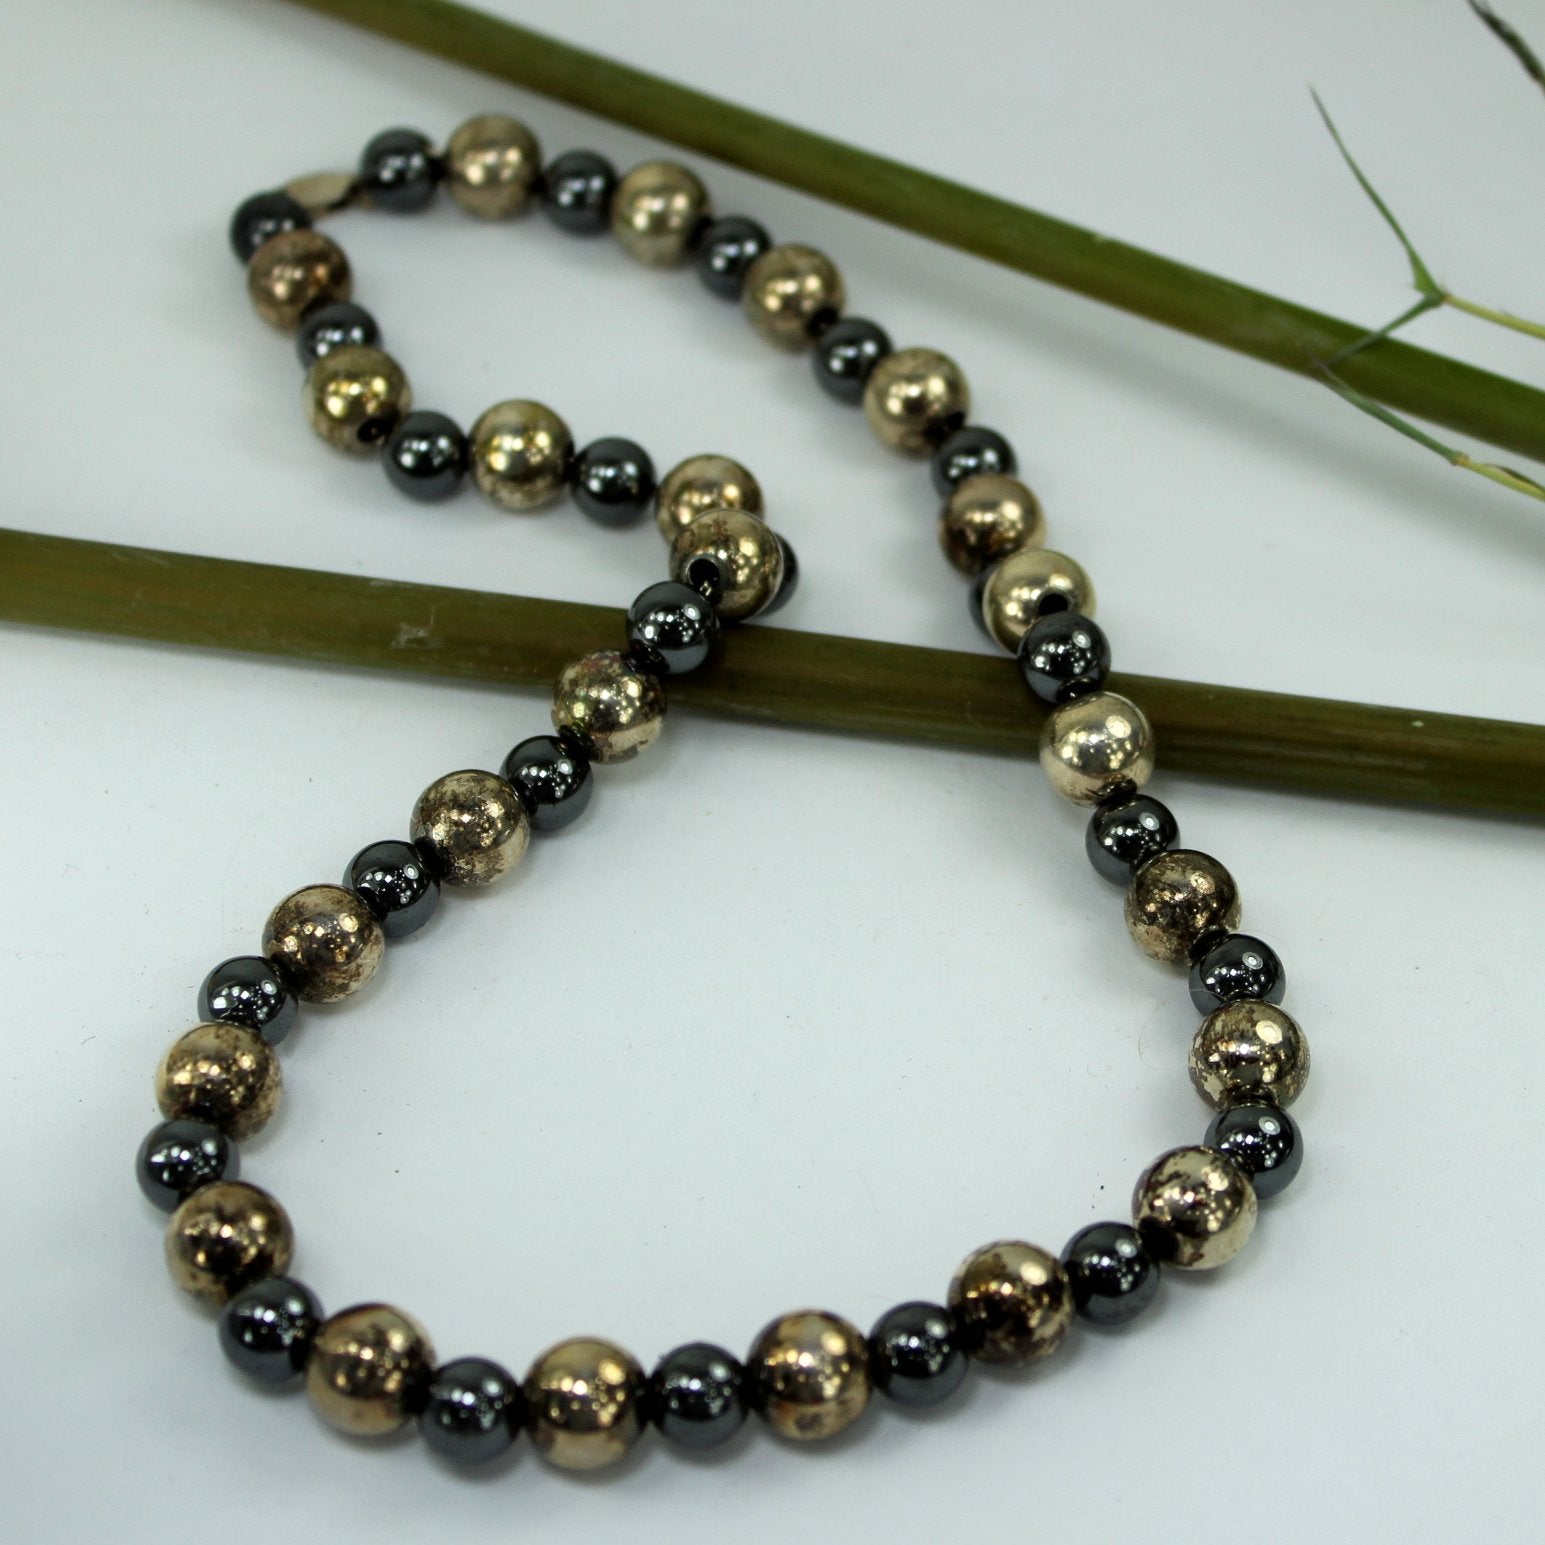 Metal Bead Necklace Silver Black Alternating Beads Chain Strung 925 Closure comfortable on the neck